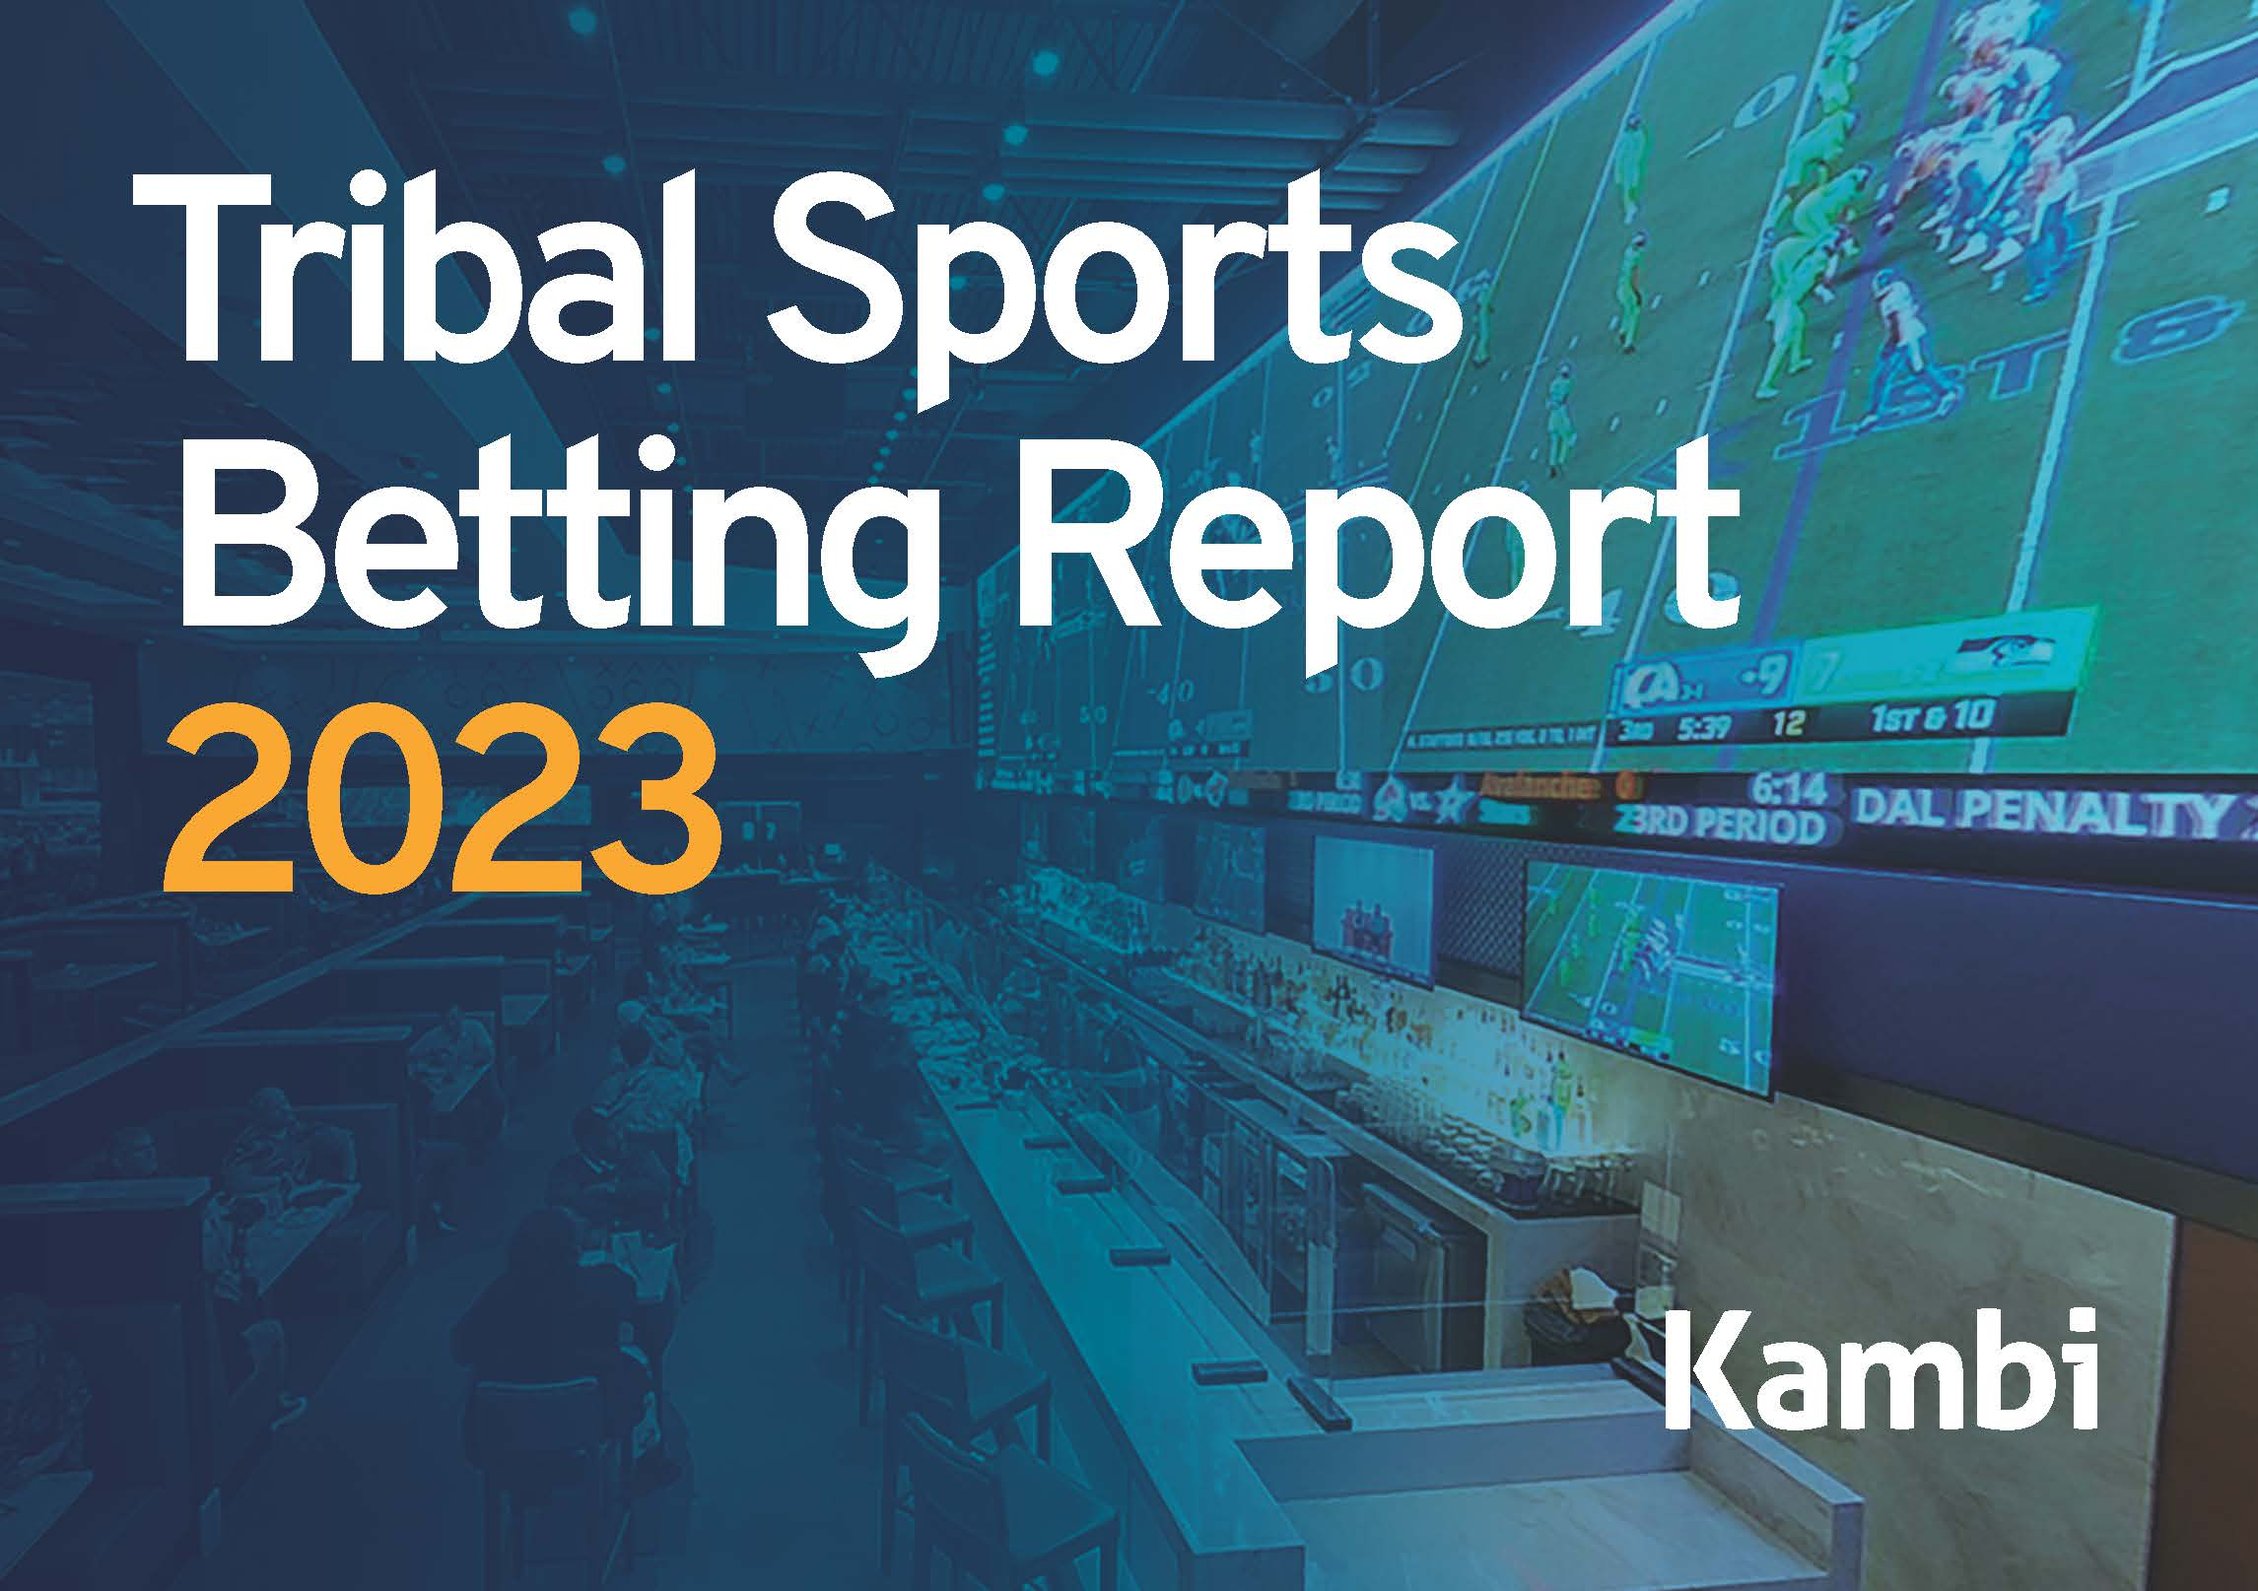 Kambis Tribal Sports Betting Report_Page_1